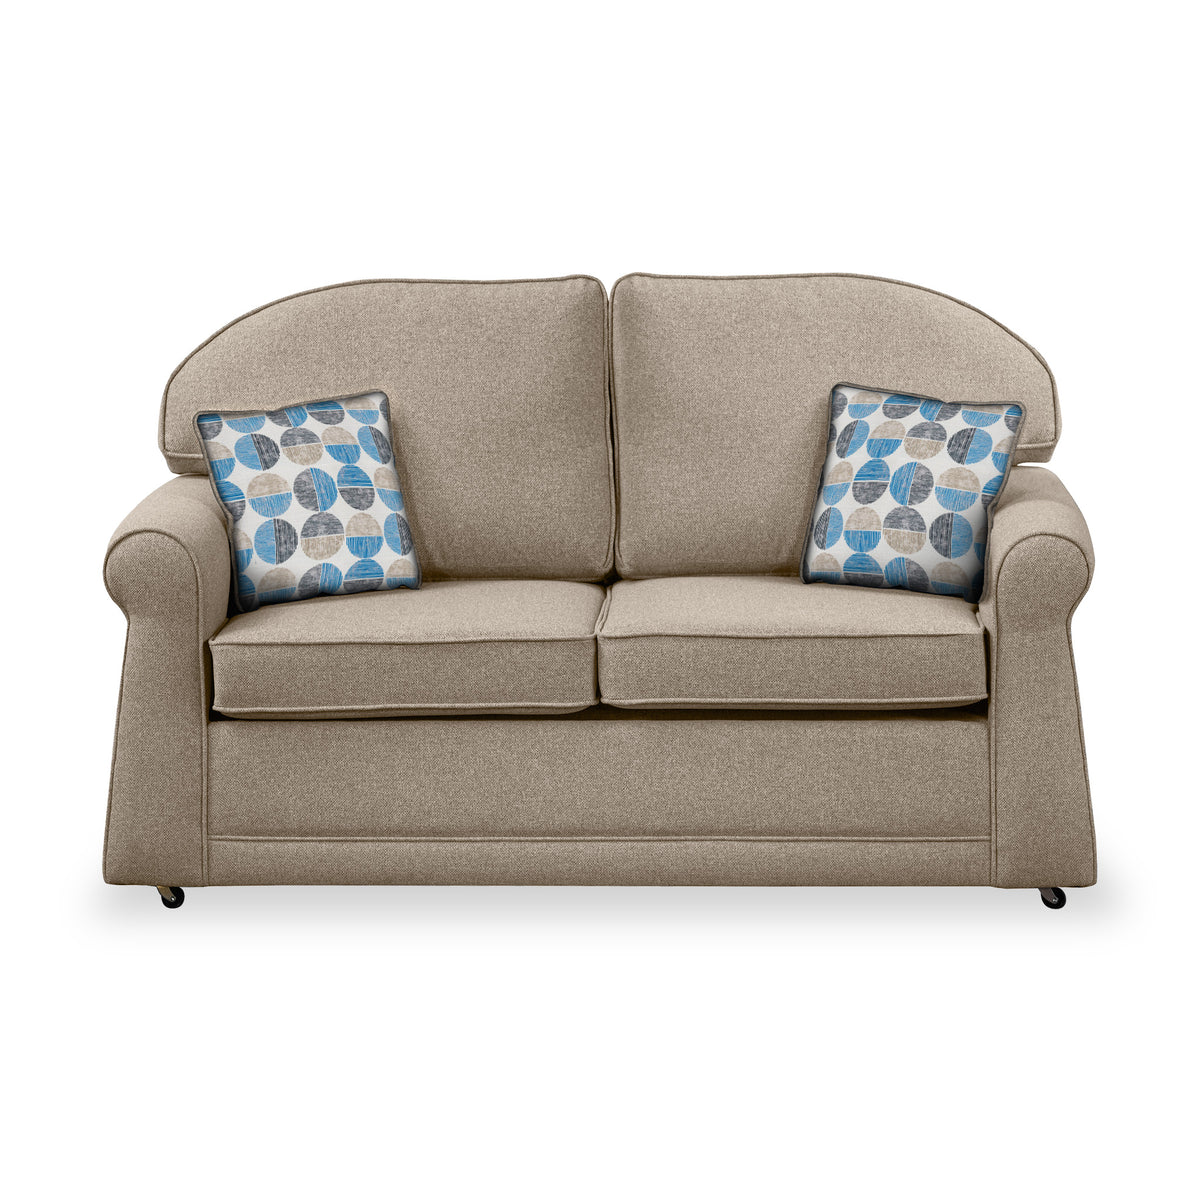 Croxdon Oatmeal Faux Linen 2 Seater Sofabed with Blue Scatter Cushions from Roseland Furniture